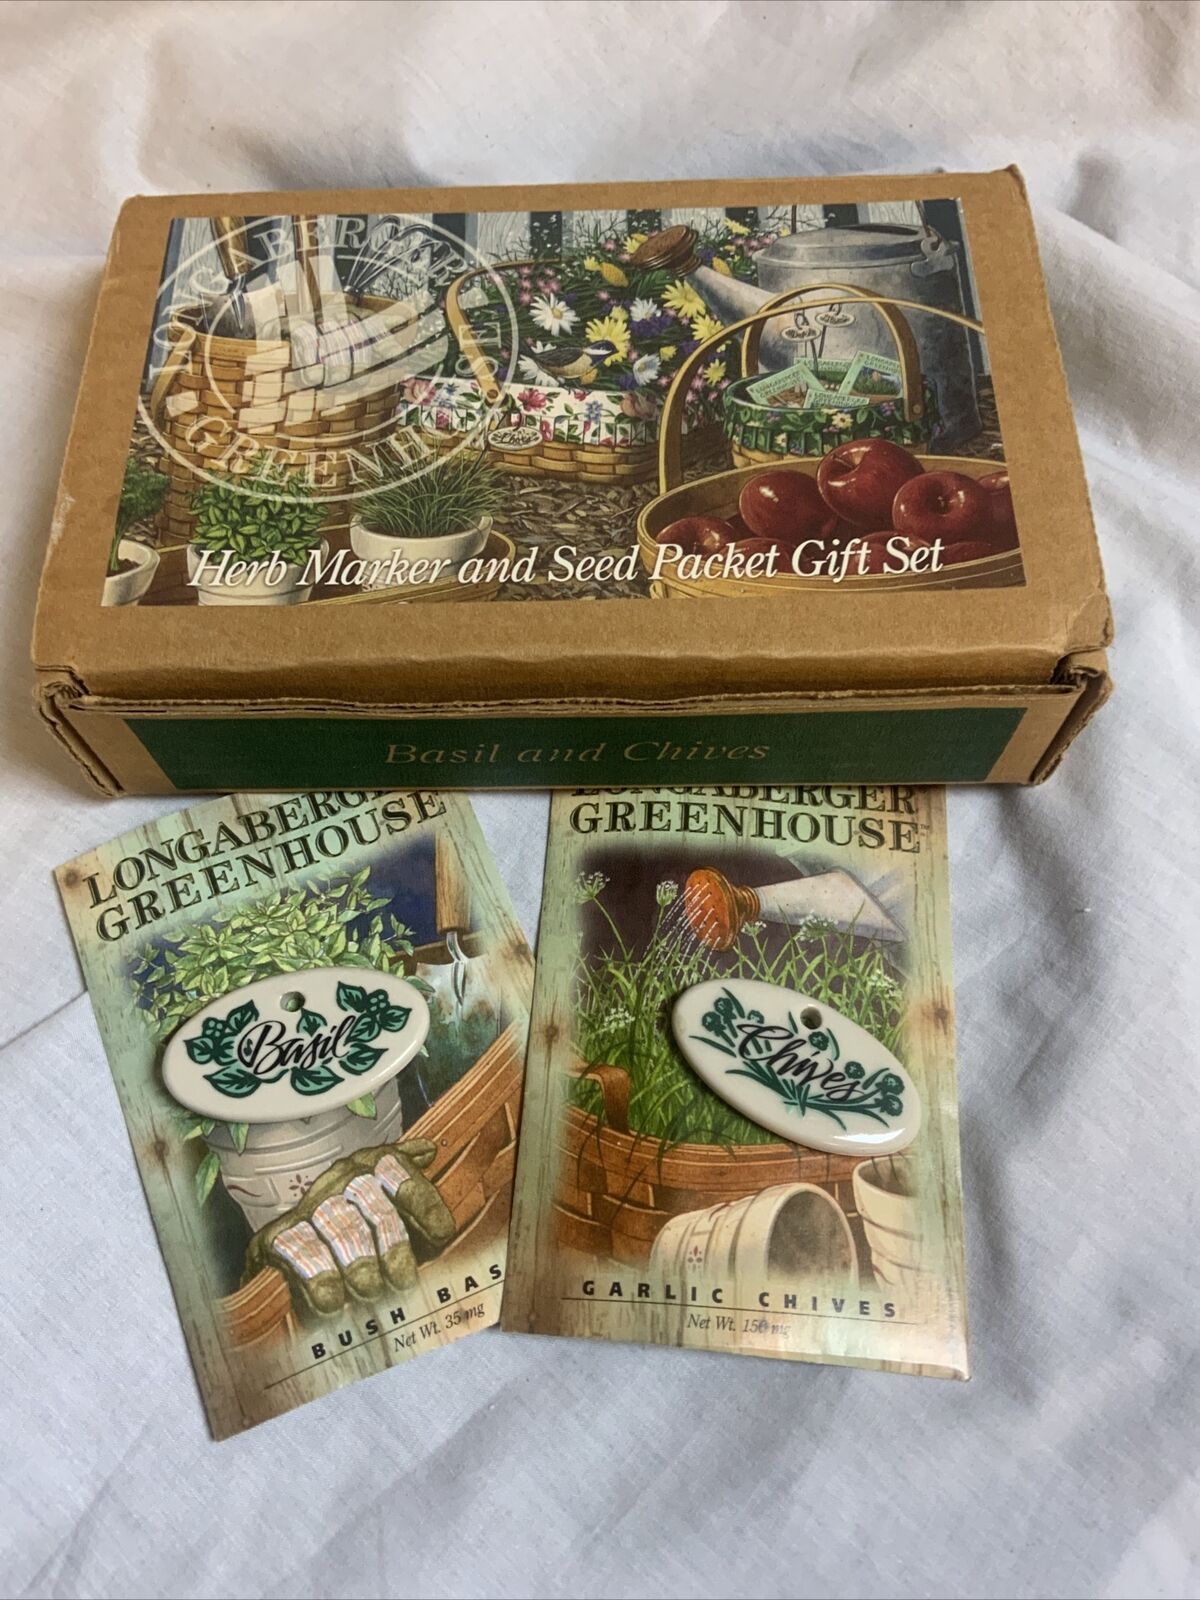 Longaberger Basil & Chives Herb Markers and Seed Packets Gift Set Wrough Iron